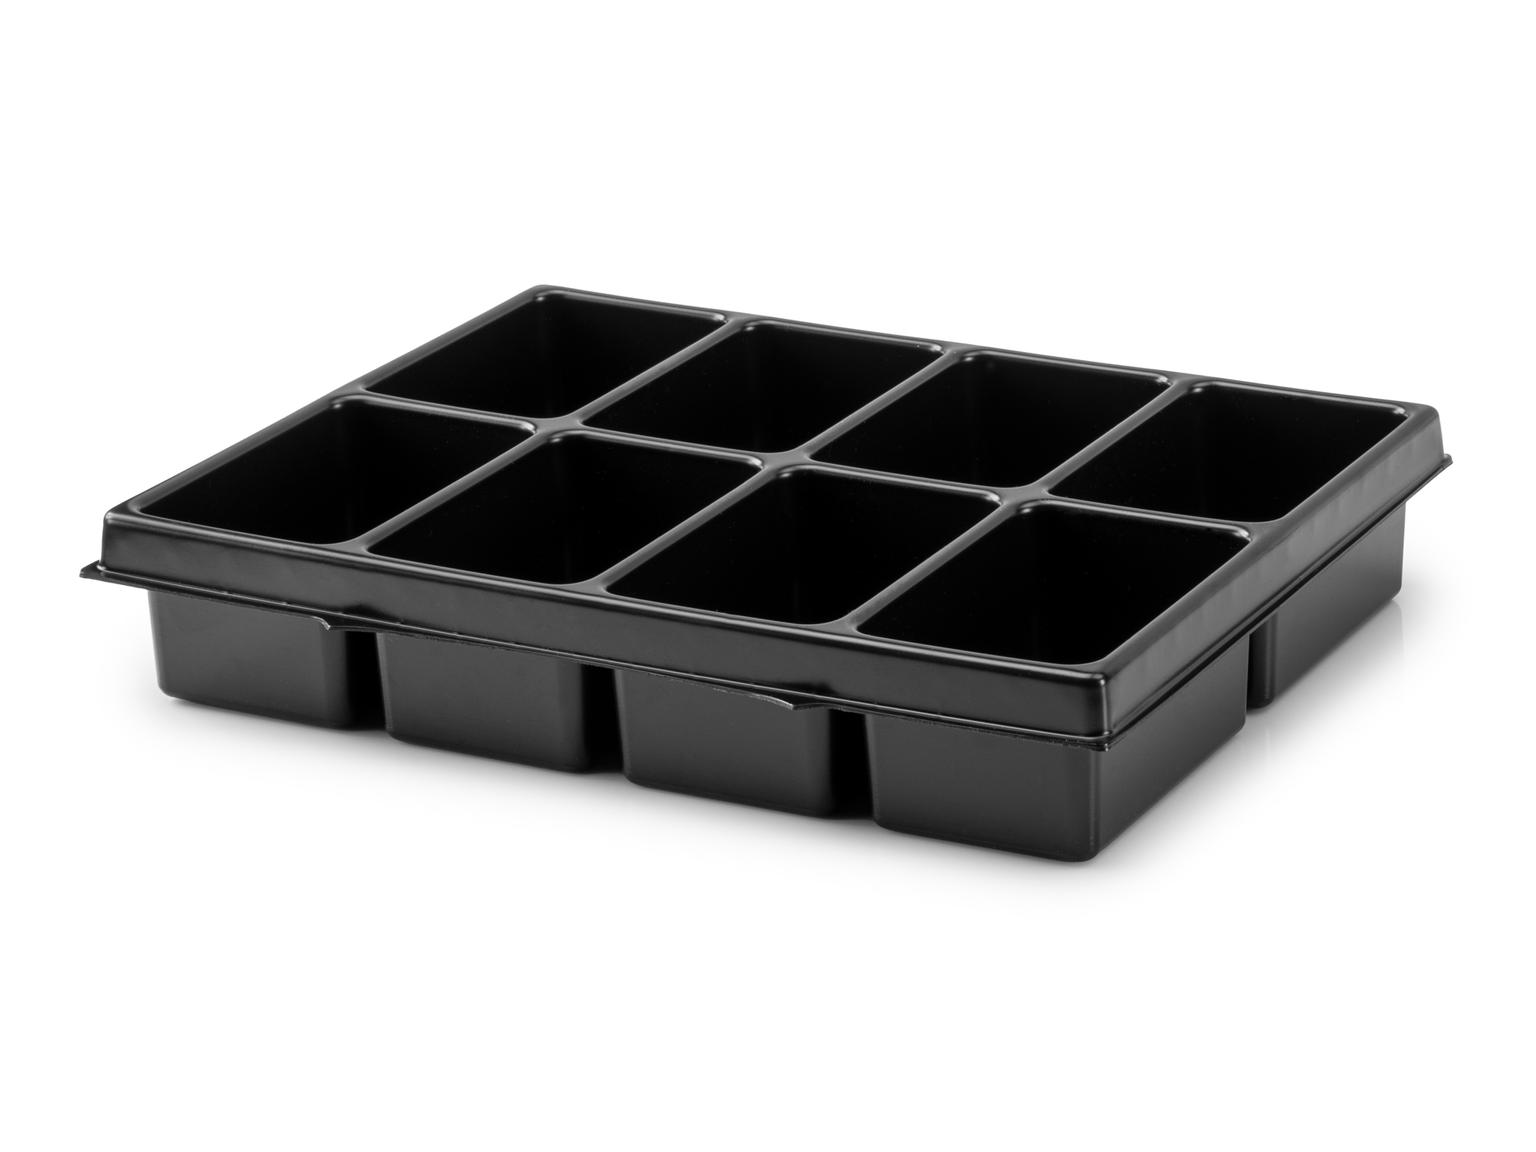 8-Cavity Parts Tray for Lidded Drawer and Open Top Drawer